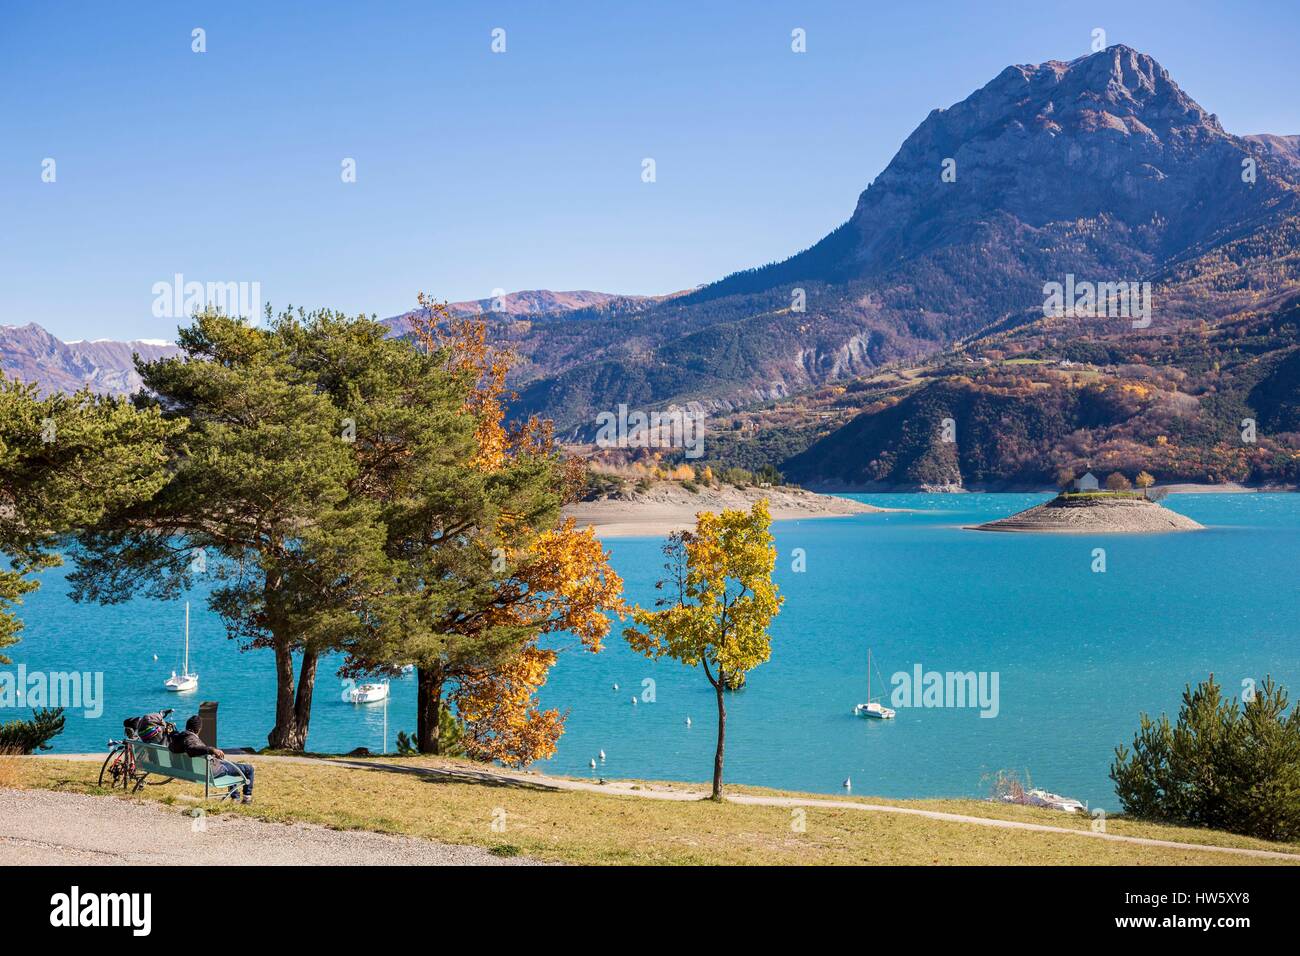 France, Hautes Alpes, Savines le Lac, lake of Serre Ponçon on Durance, in  the background the Peak of Chabrières Stock Photo - Alamy